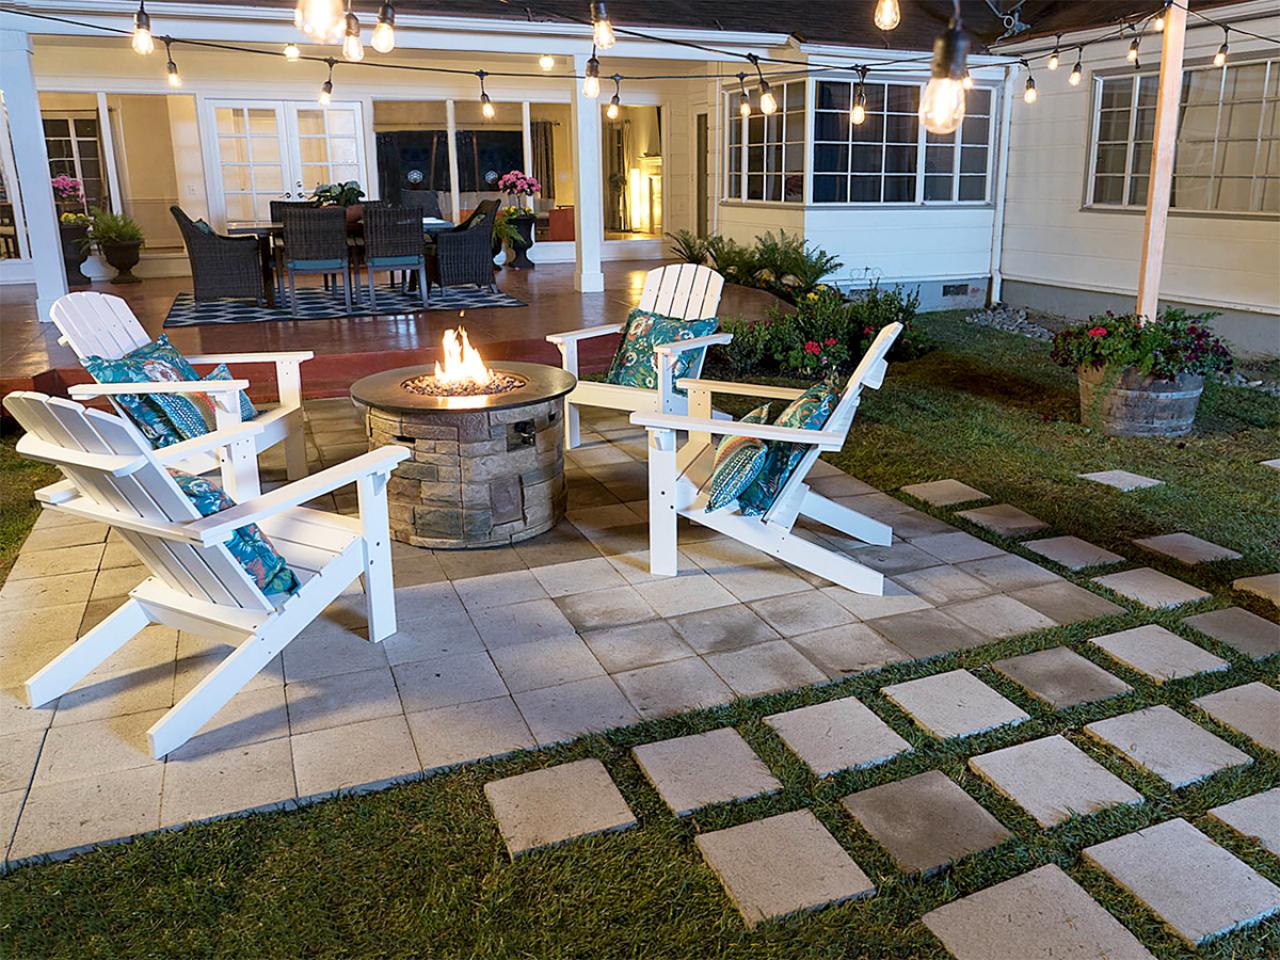 How To Lay A Paver Patio For A Firepit Diy